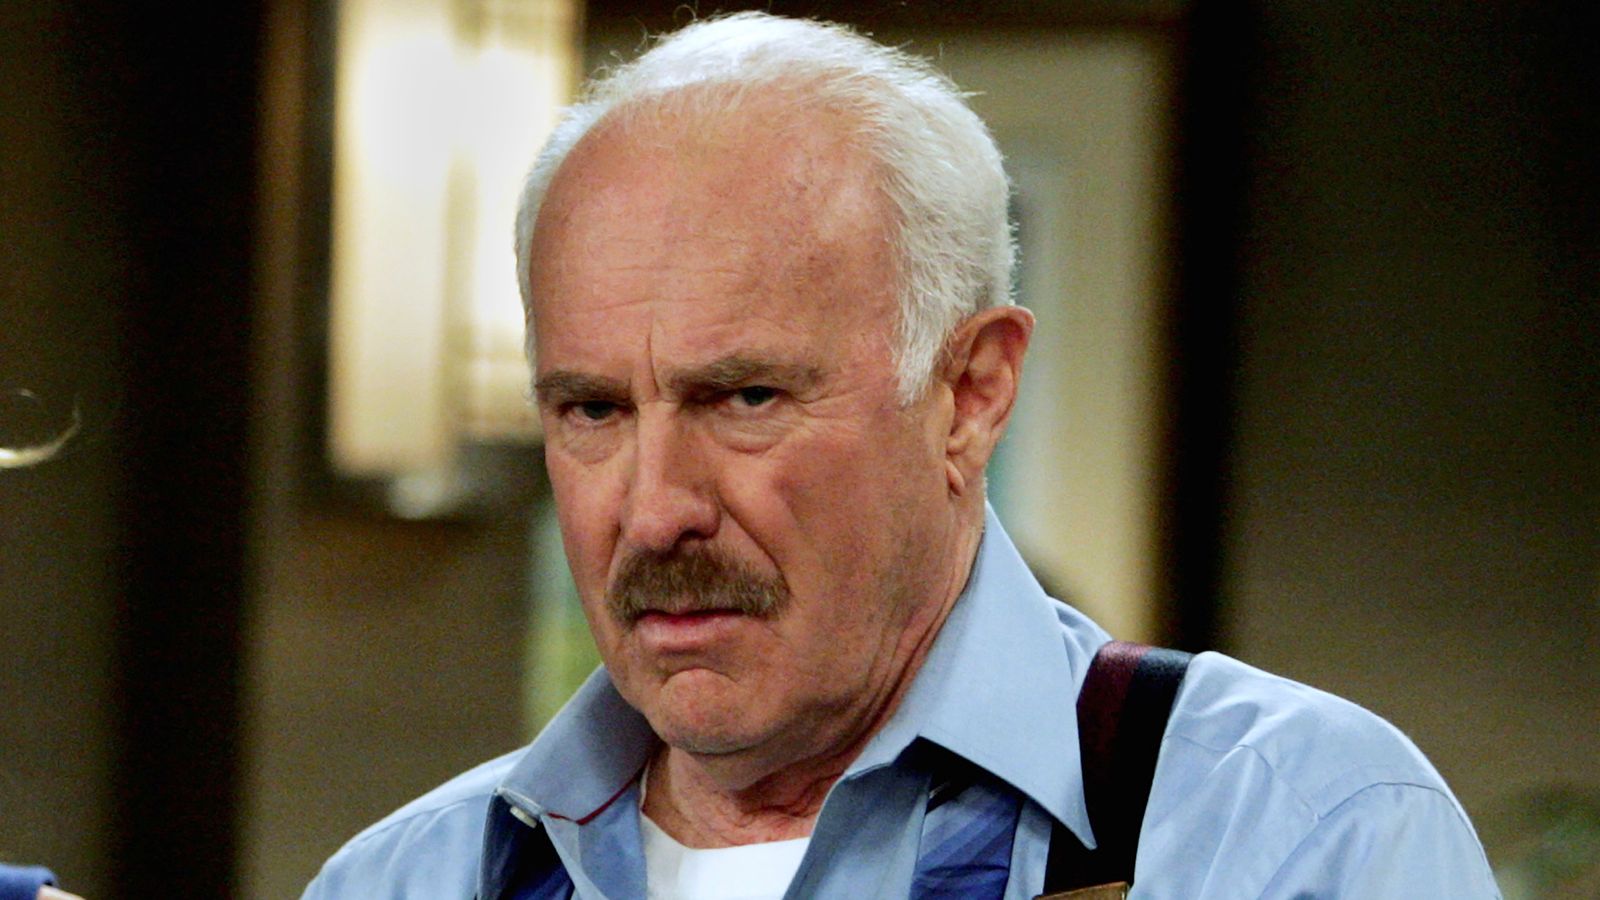 Stars pay tribute to Dabney Coleman, actor who starred in 9 to 5 and Tootsie